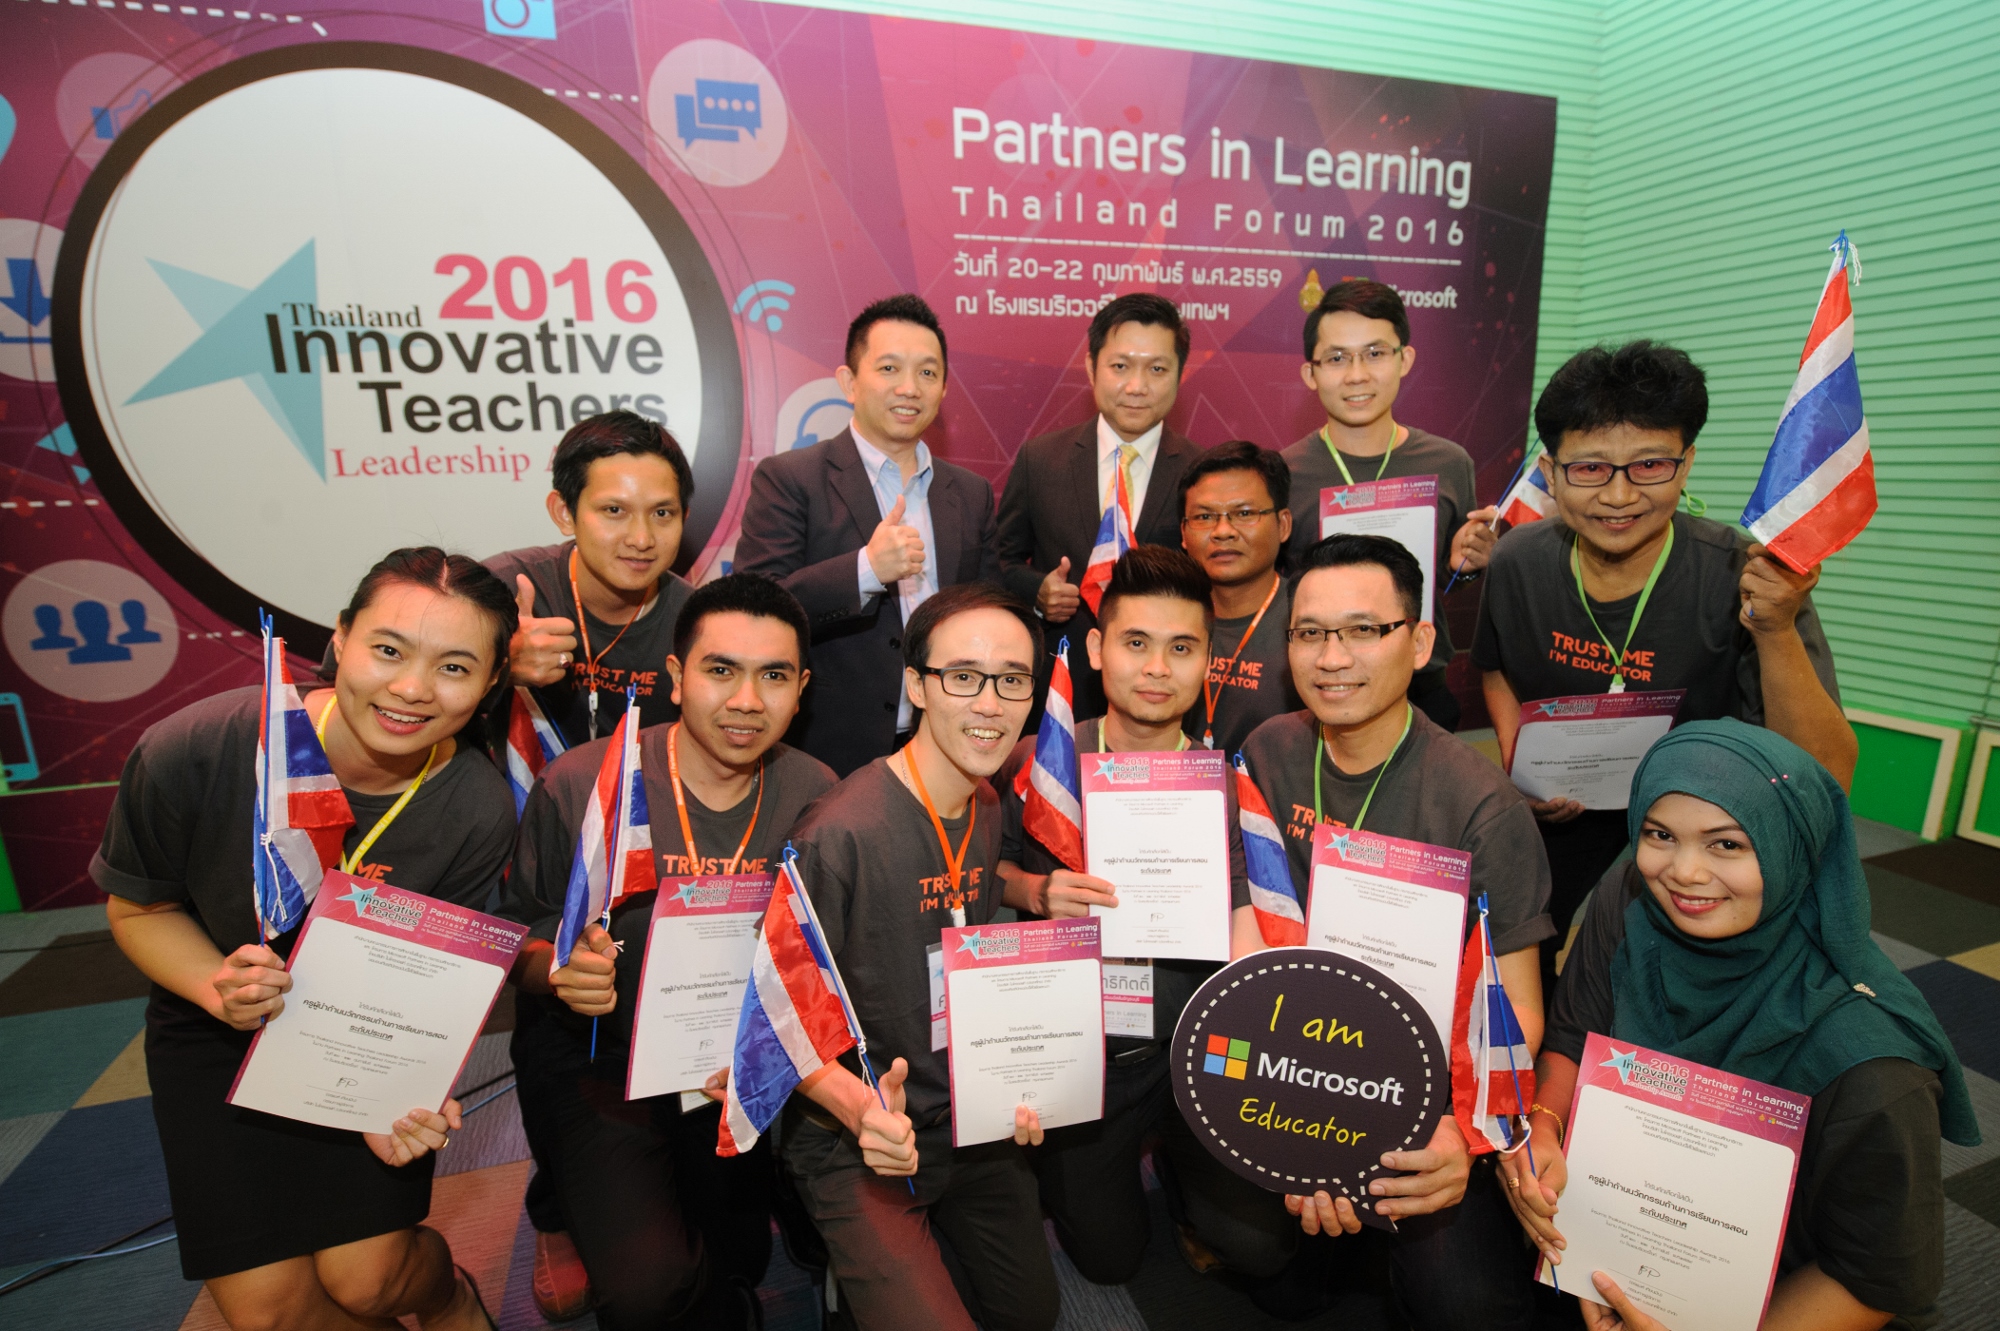 Supoet Srinutapong (second row, 3rd from left), Director – Public Sector Program, and Somsak Mukdavannakorn (second row, 3rd from right), Public Sector Director, Microsoft Thailand, present awards to 10 talented teachers, who leveraged technology to improve their teaching methods, at Thailand Innovative Teachers Leadership Awards 2016 at Riverside Bangkok Hotel.